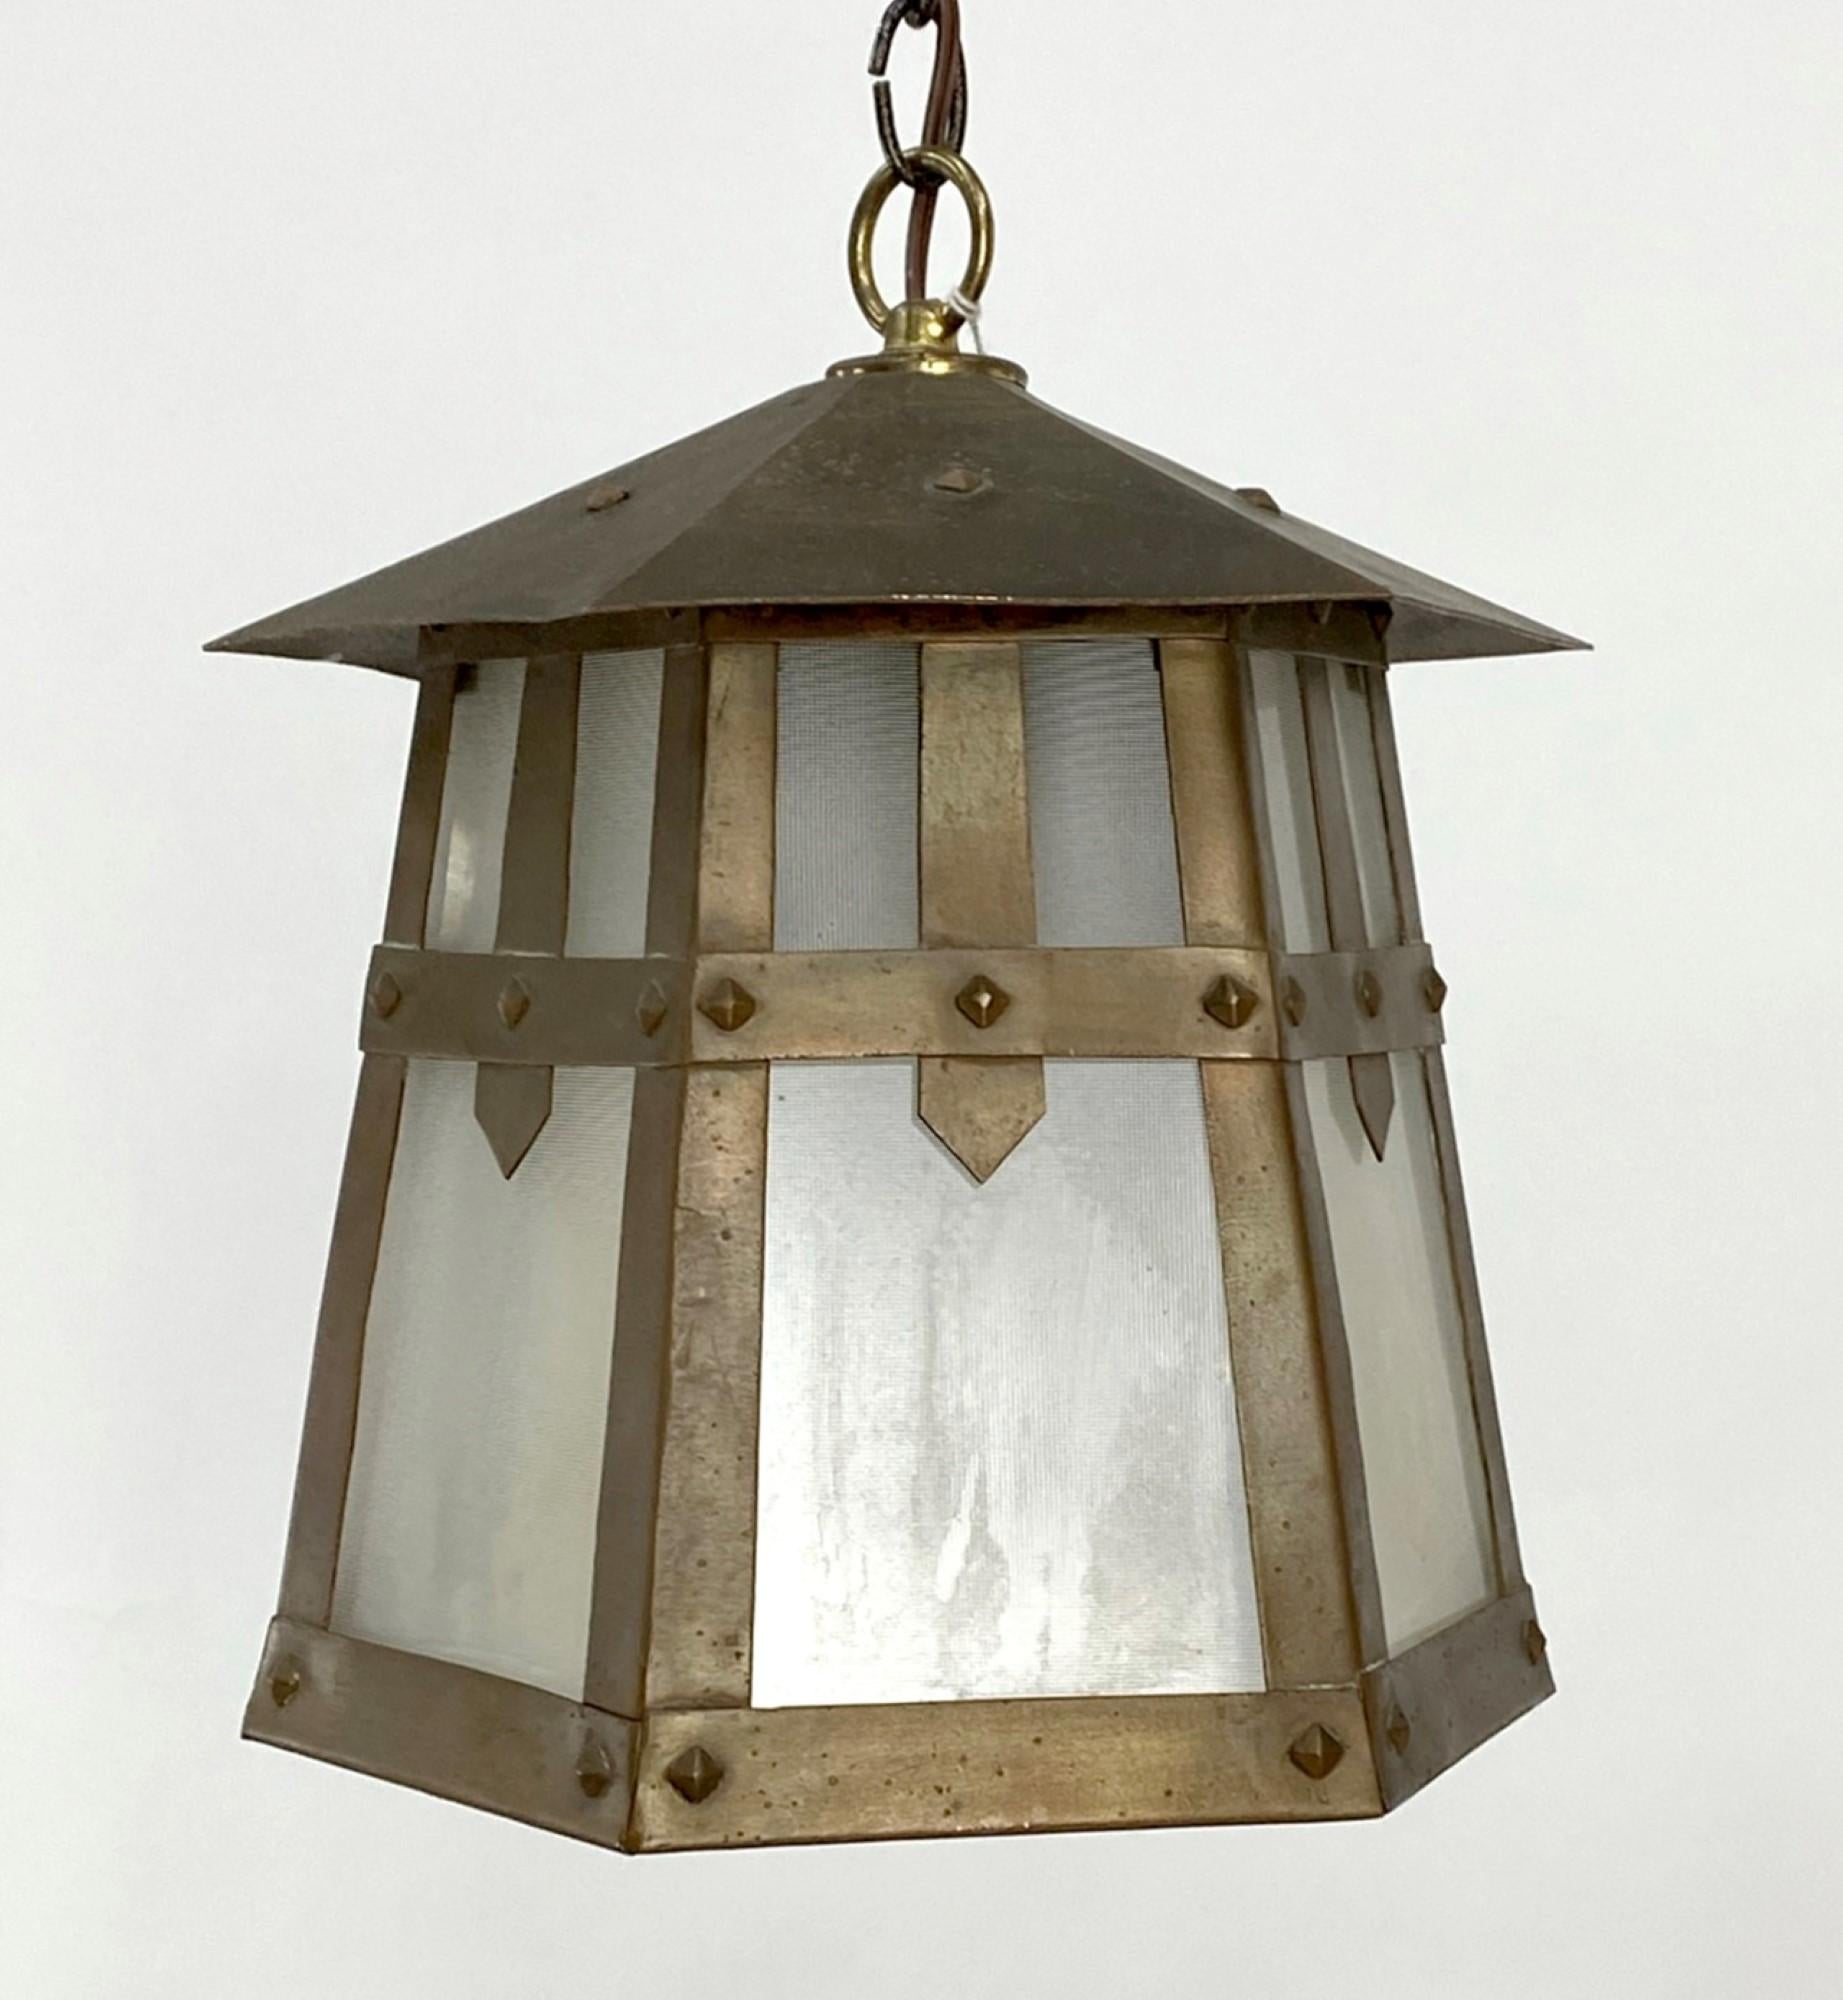 1920s brass Arts & Crafts hexagon shape lantern with opaque frosted glass. This has a single household socket. This can be seen at our 400 Gilligan St location in Scranton, PA.